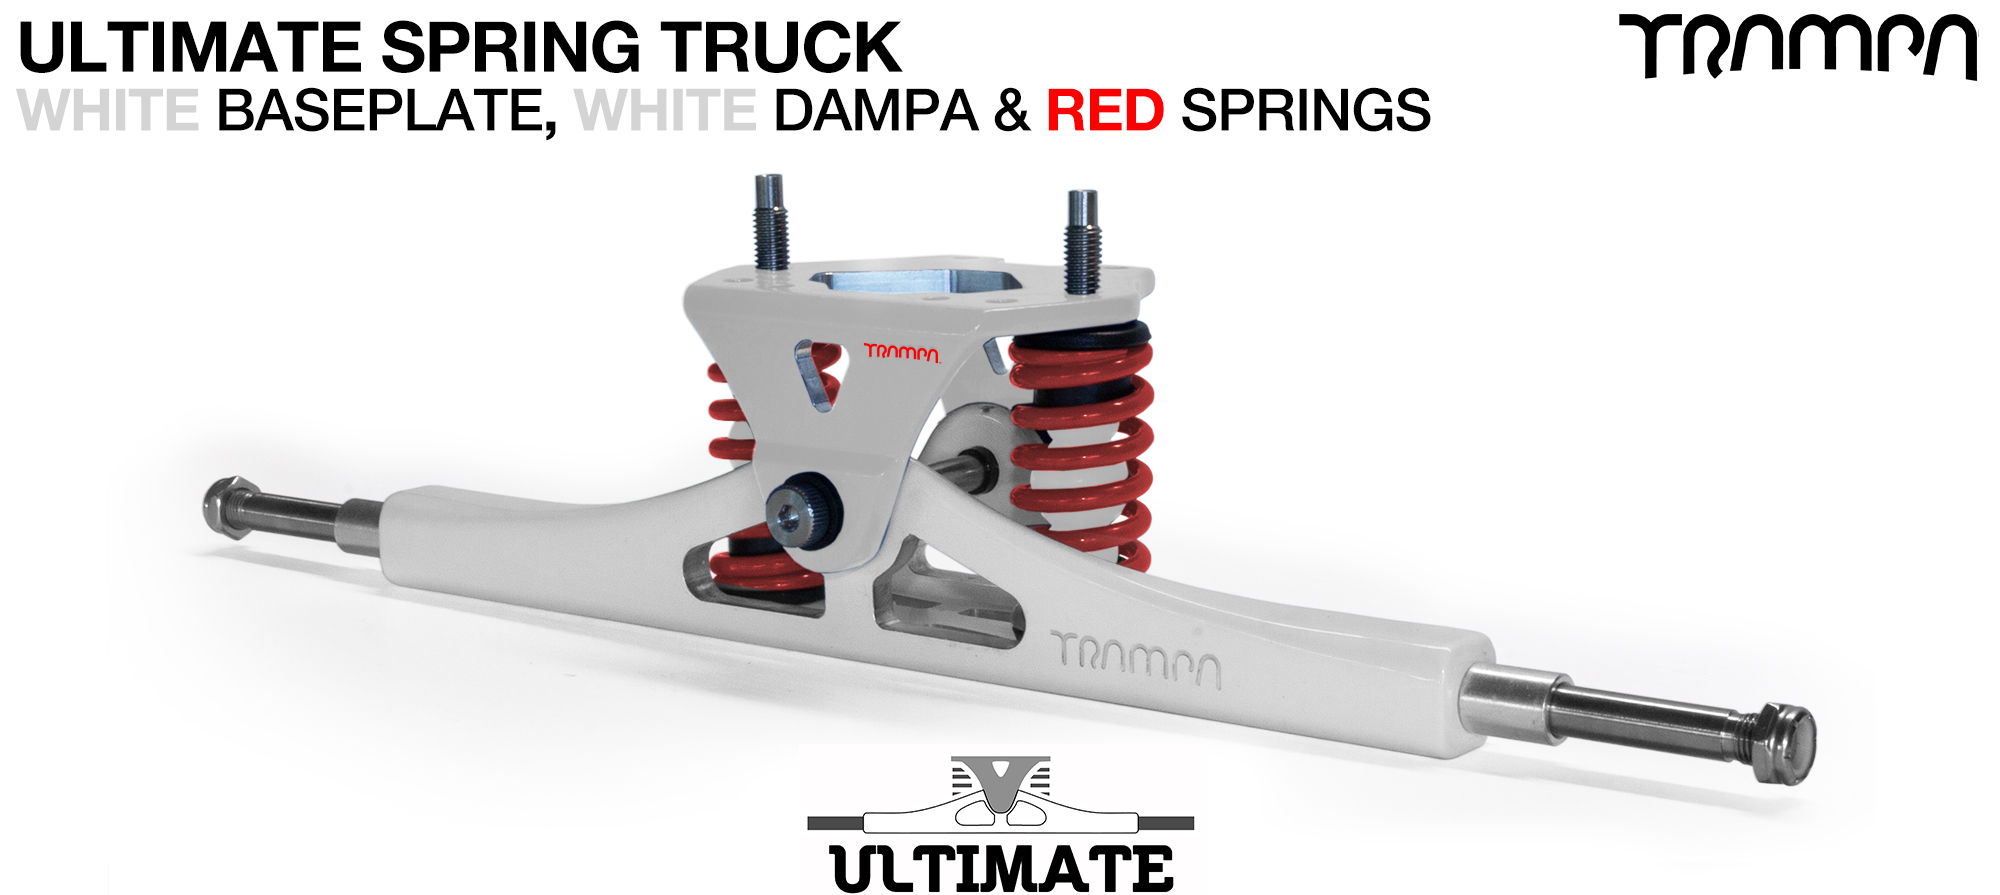 ULTIMATE ATB TRUCK - WHITE ATB Hanger with TITANIUM Axles & Kingpin & WHITE with RED logo Baseplate  